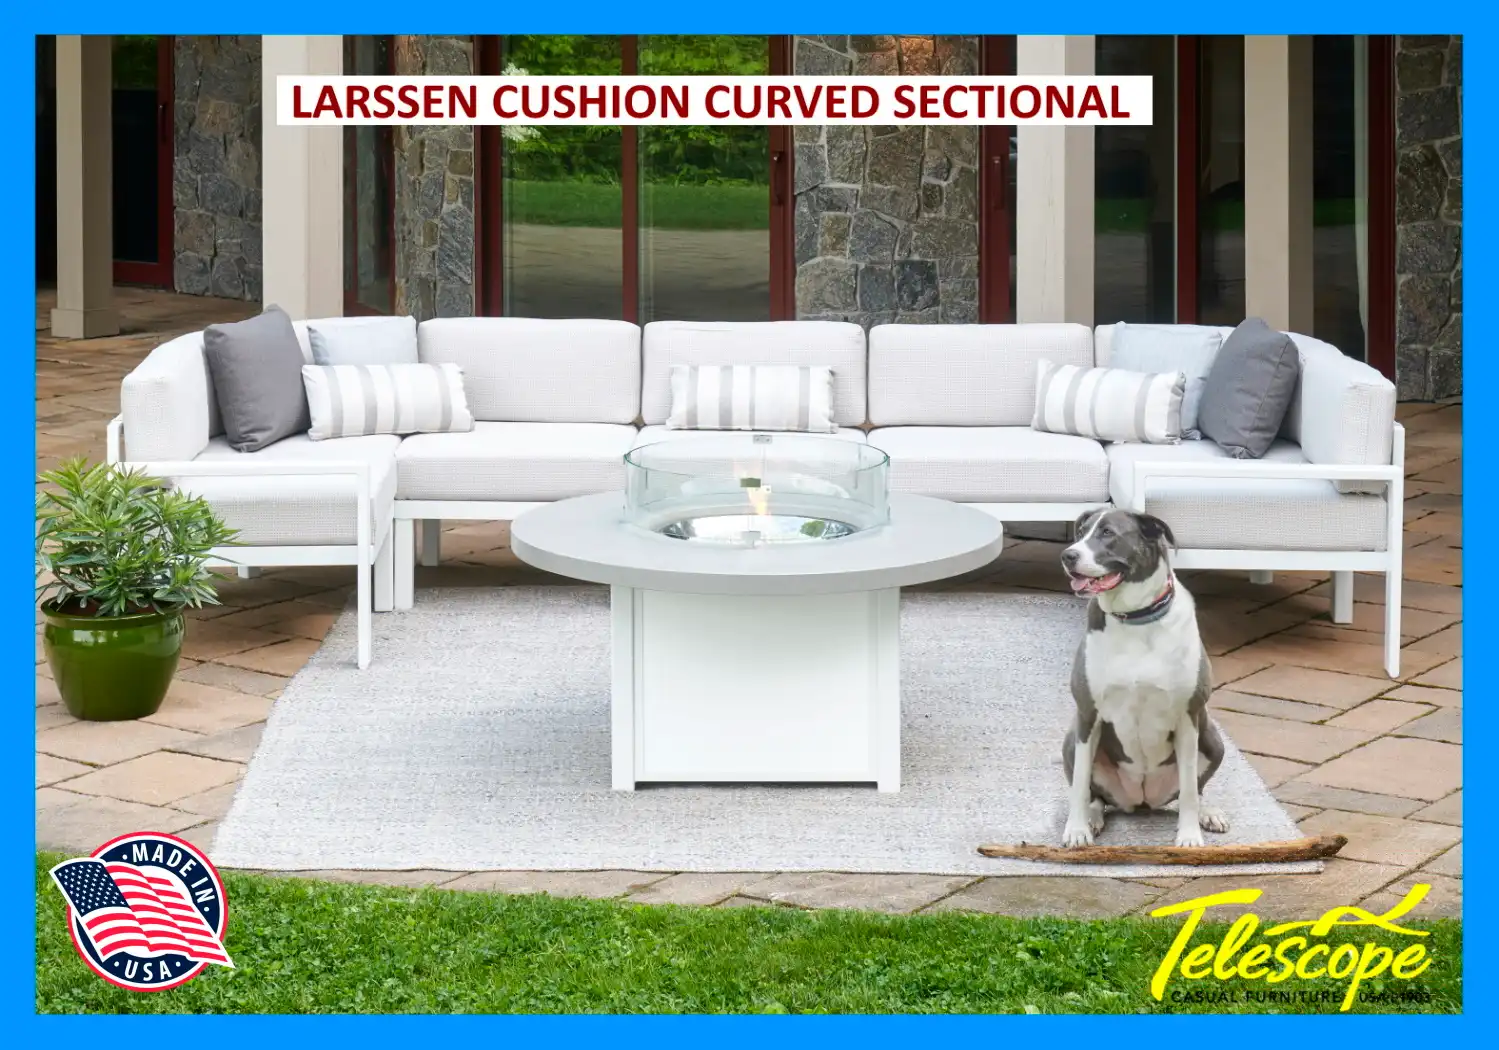 LARSSEN CUSHION CURVED SECTIONAL